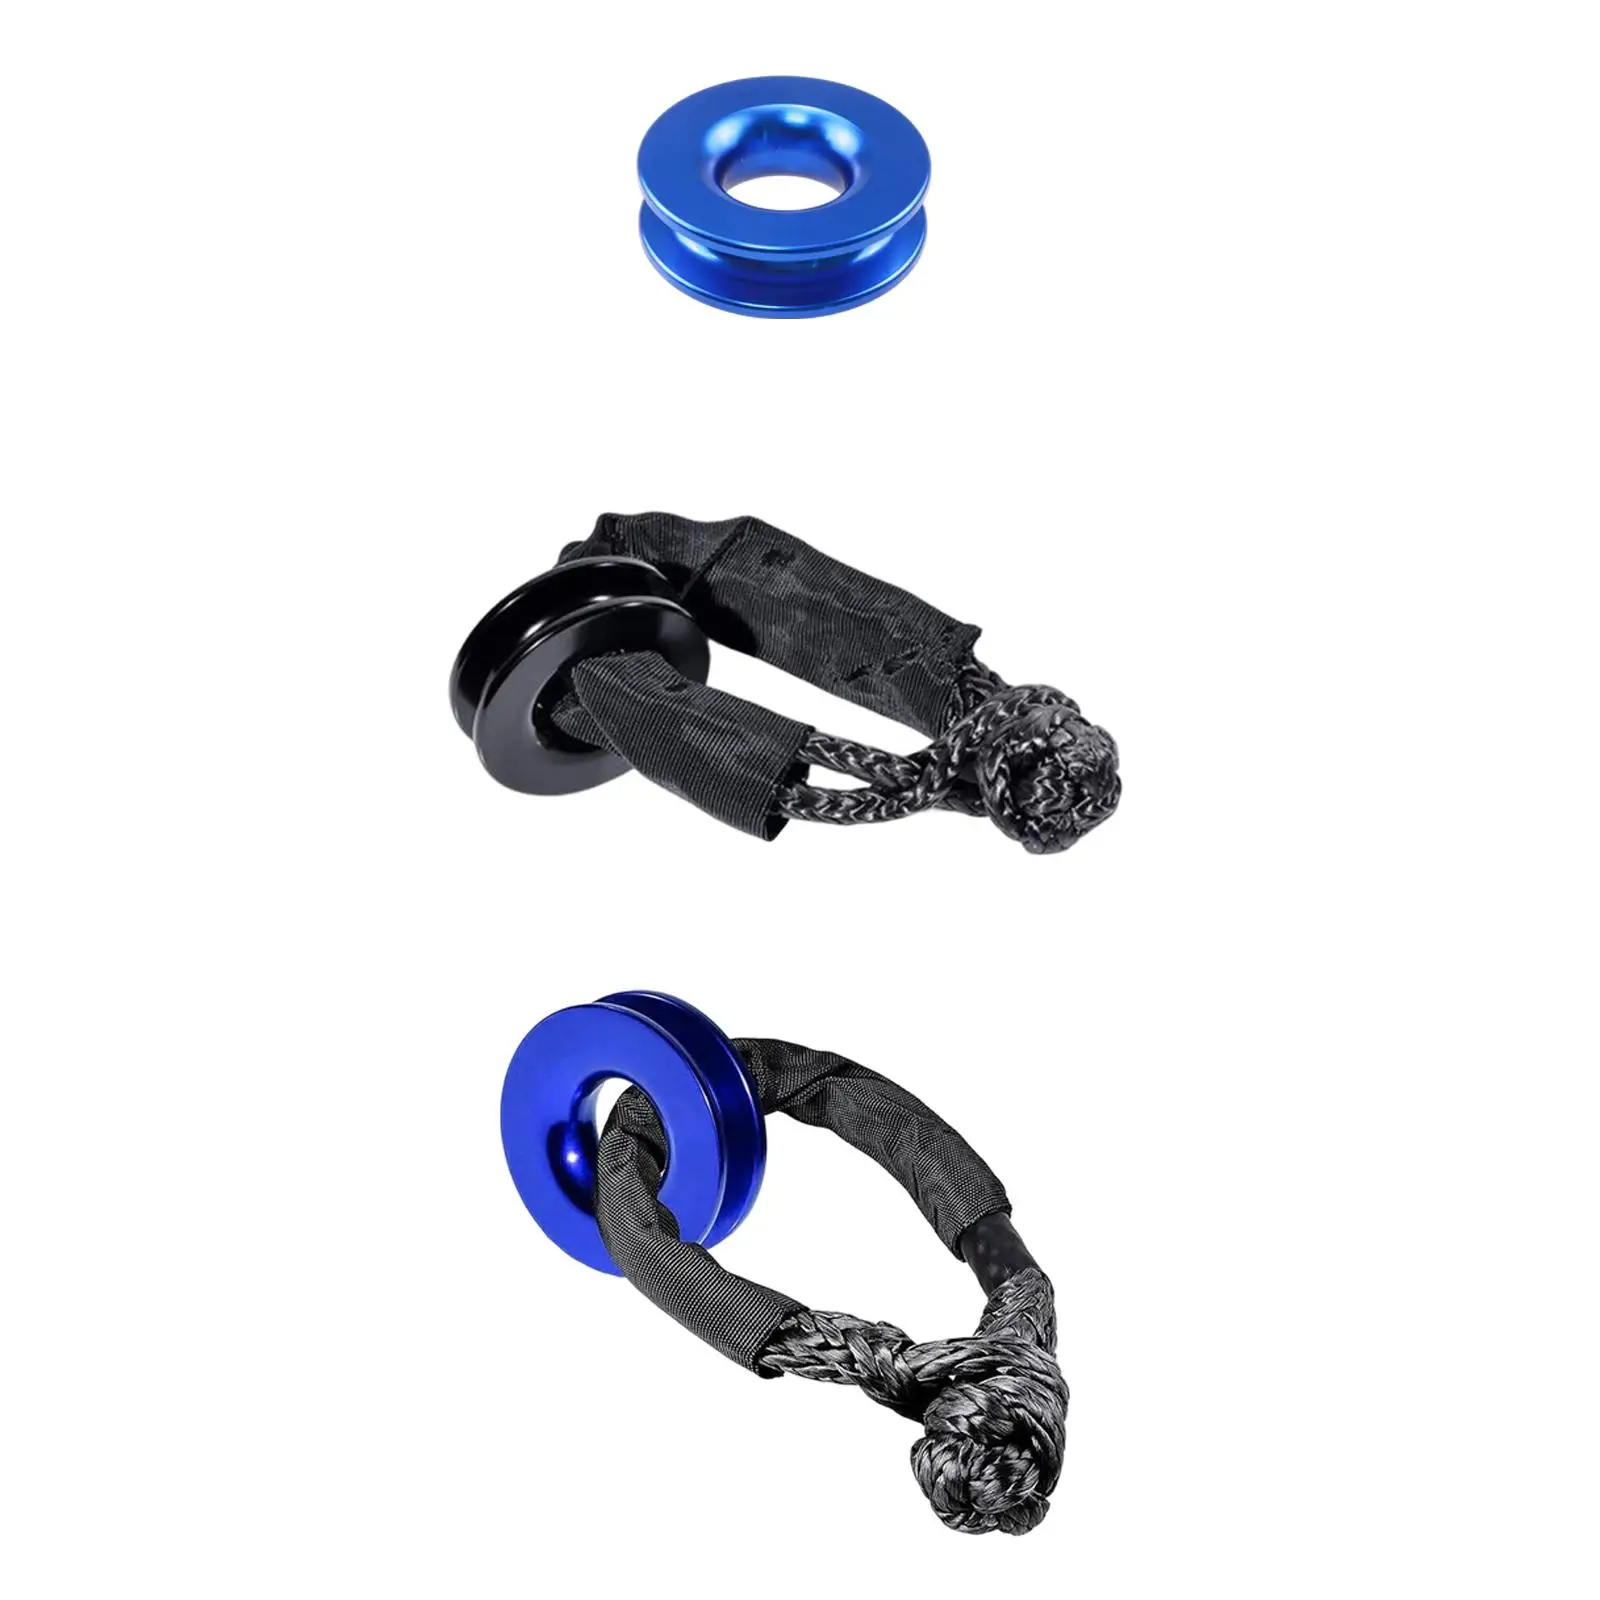 Recovery Ring for Recovery Strap and Recovery Rope for Tow Rope 41000lbs Snatch Recovery Ring for Soft Shackle ATV UTV SUV